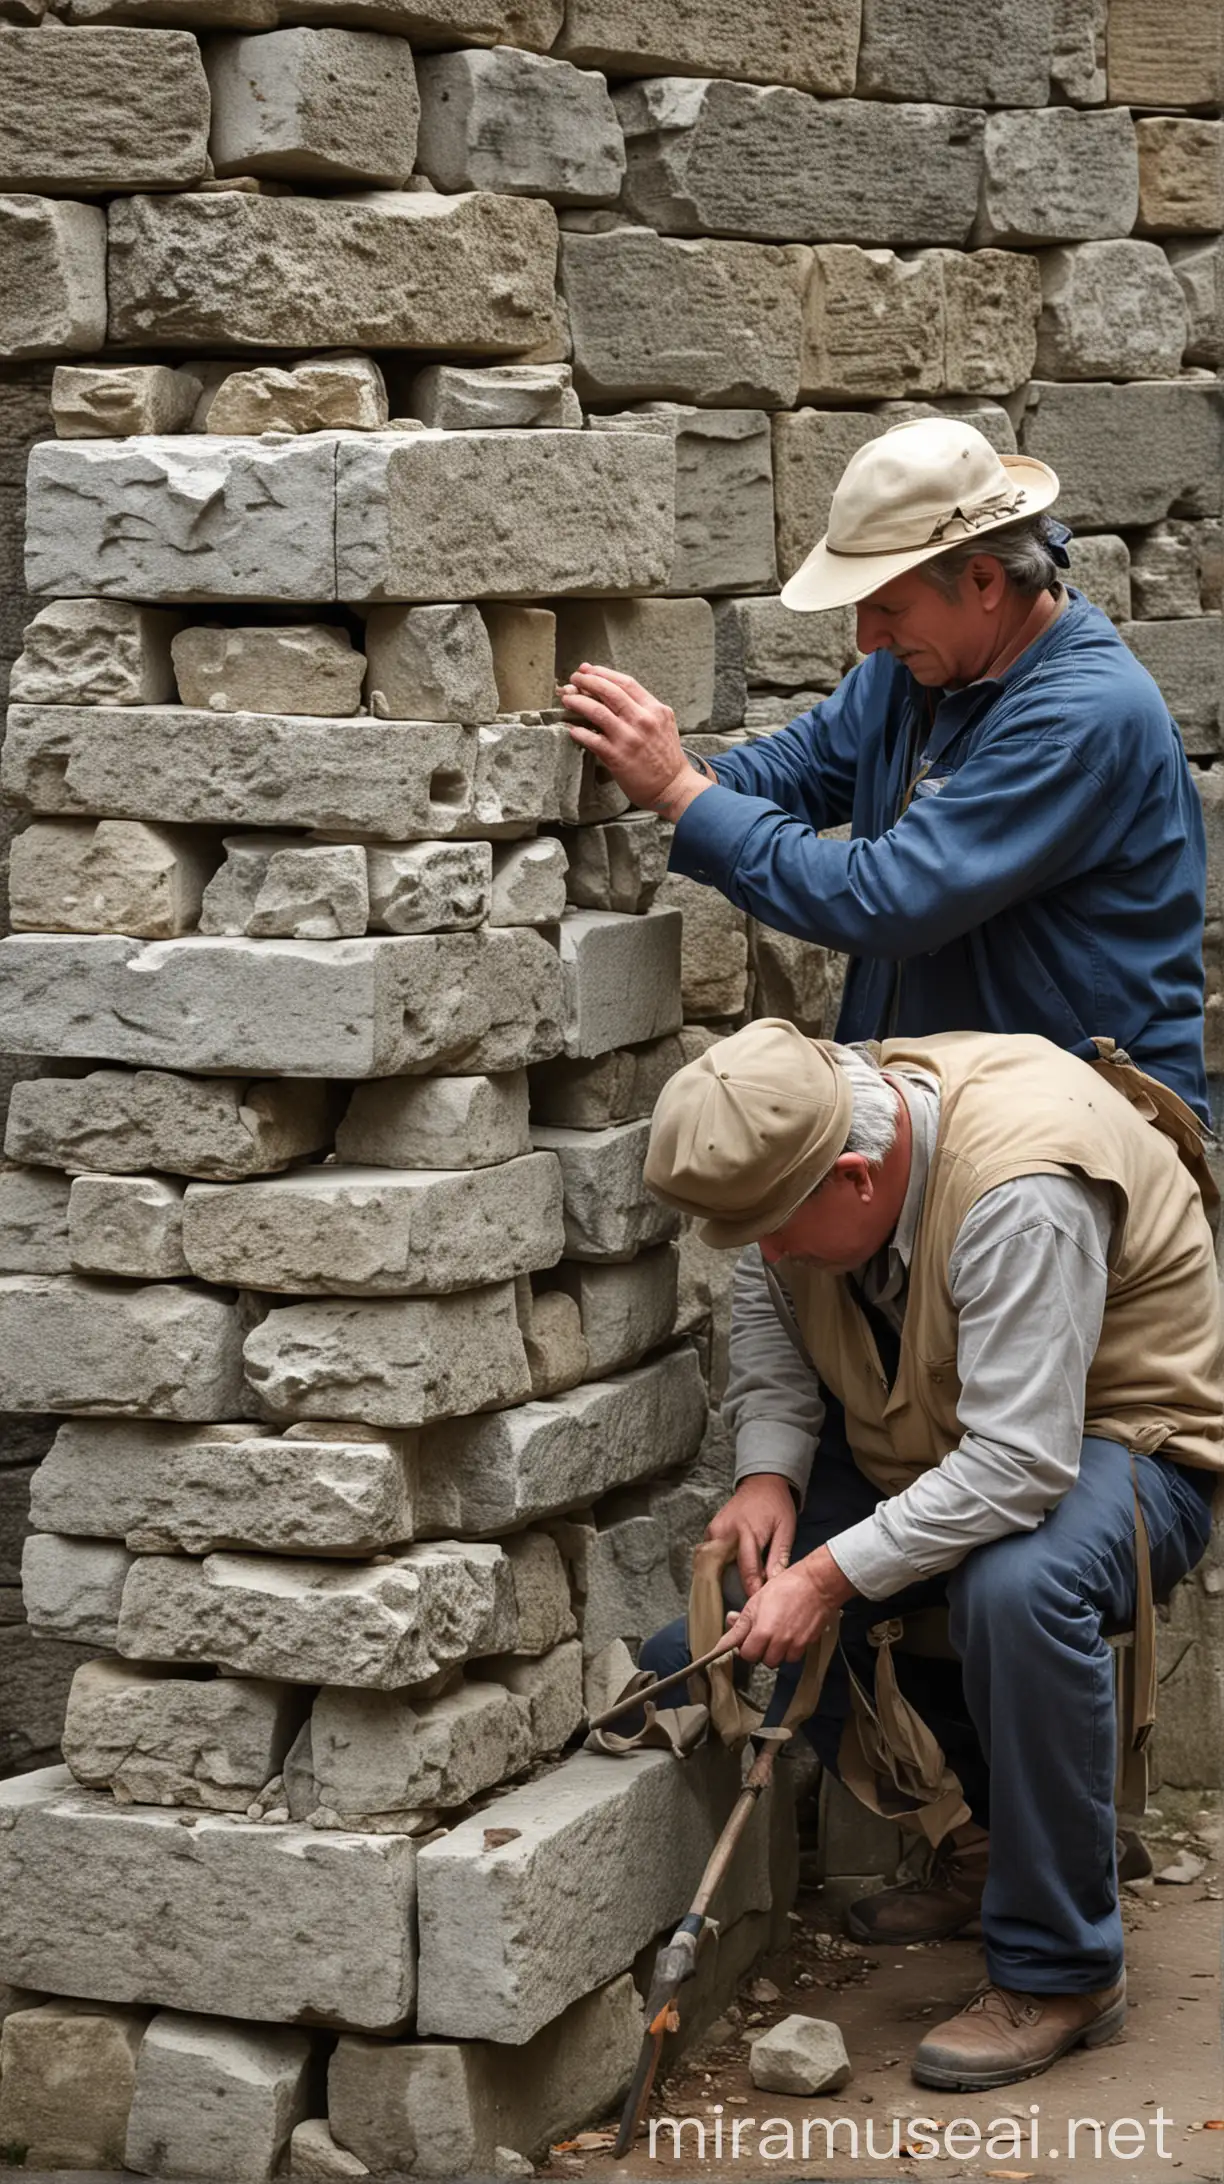 Traveler Observing Two Stonemasons Crafting Stone Structures